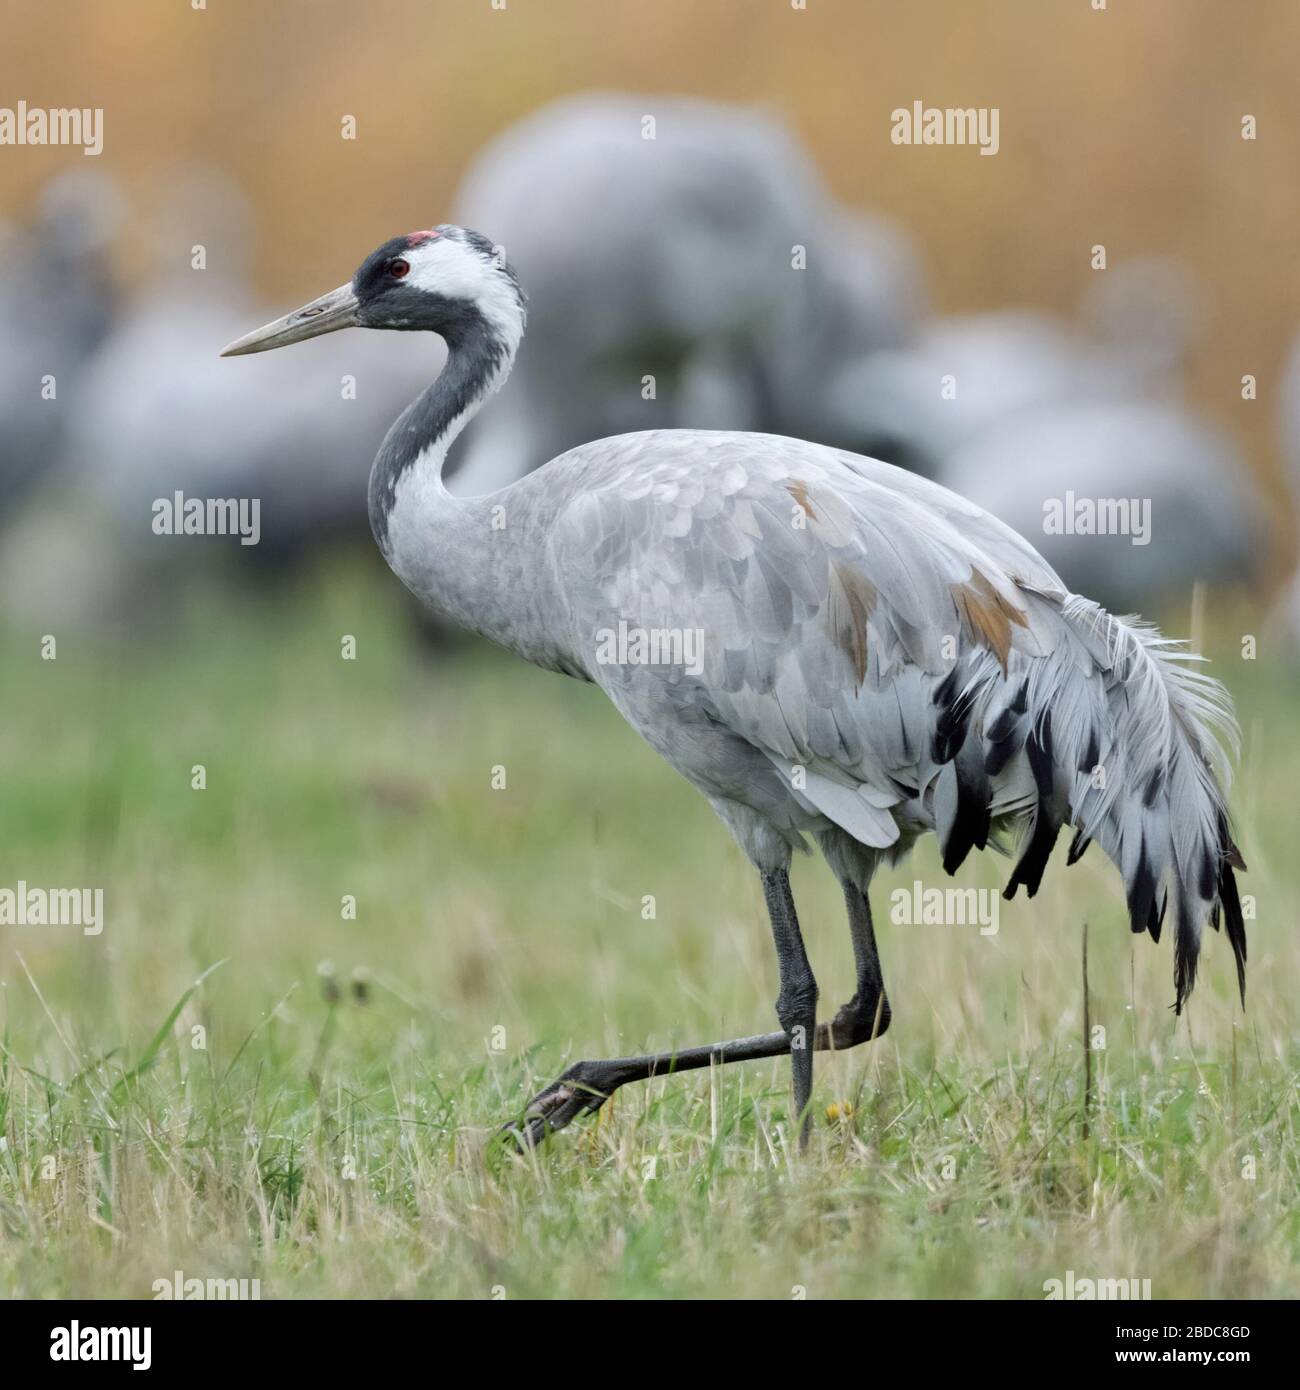 Common Crane ( Grus grus ), single bird in front of a huge flock, walking through grassland, a meadow, searching for food, side view, wildlife, Europe Stock Photo